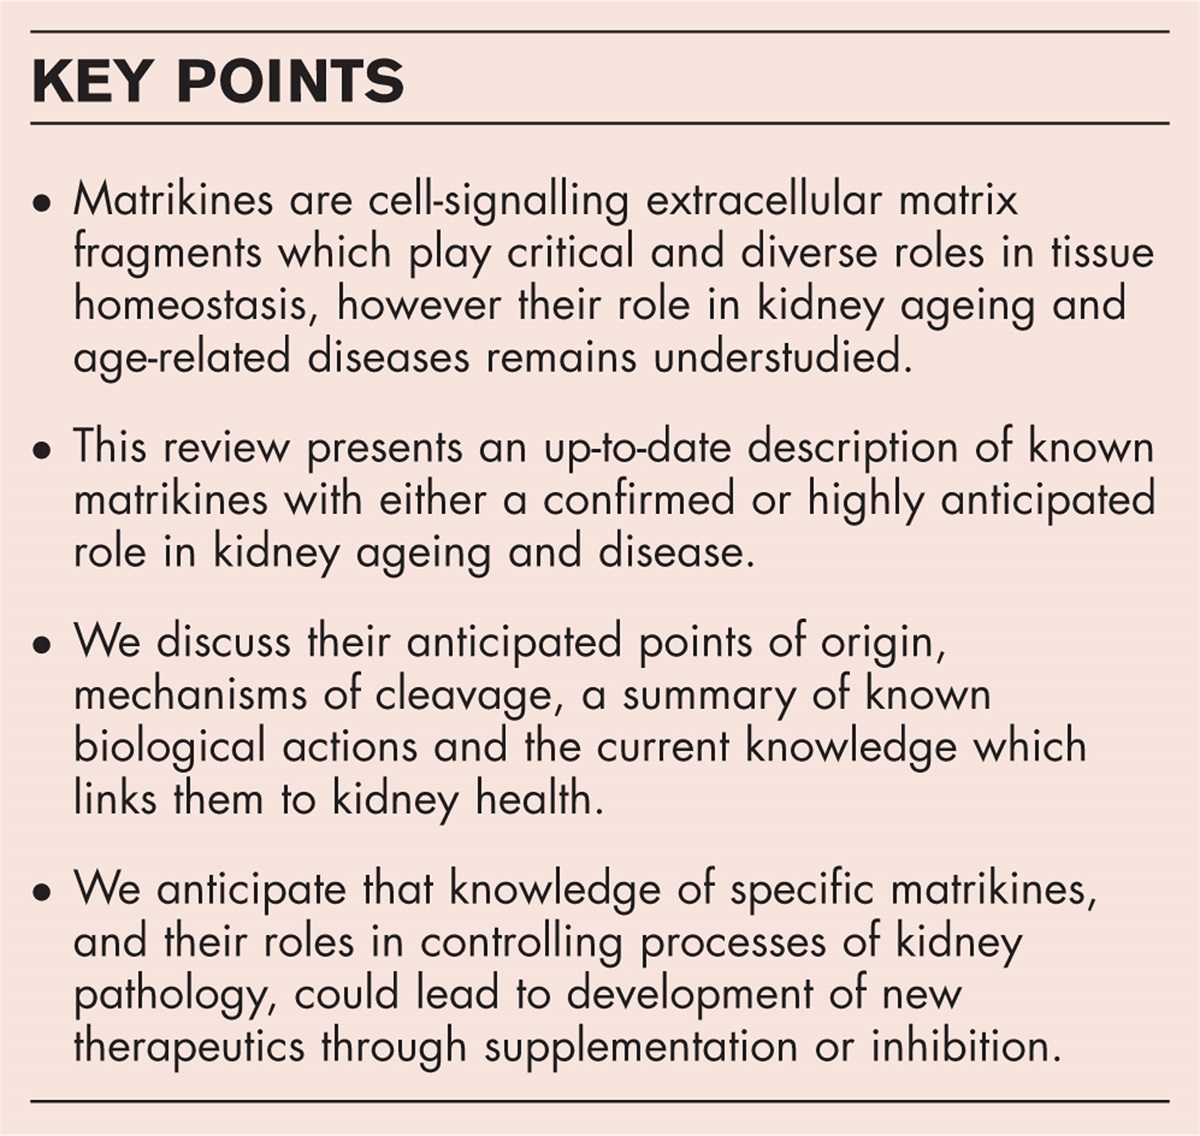 Matrikines in kidney ageing and age-related disease